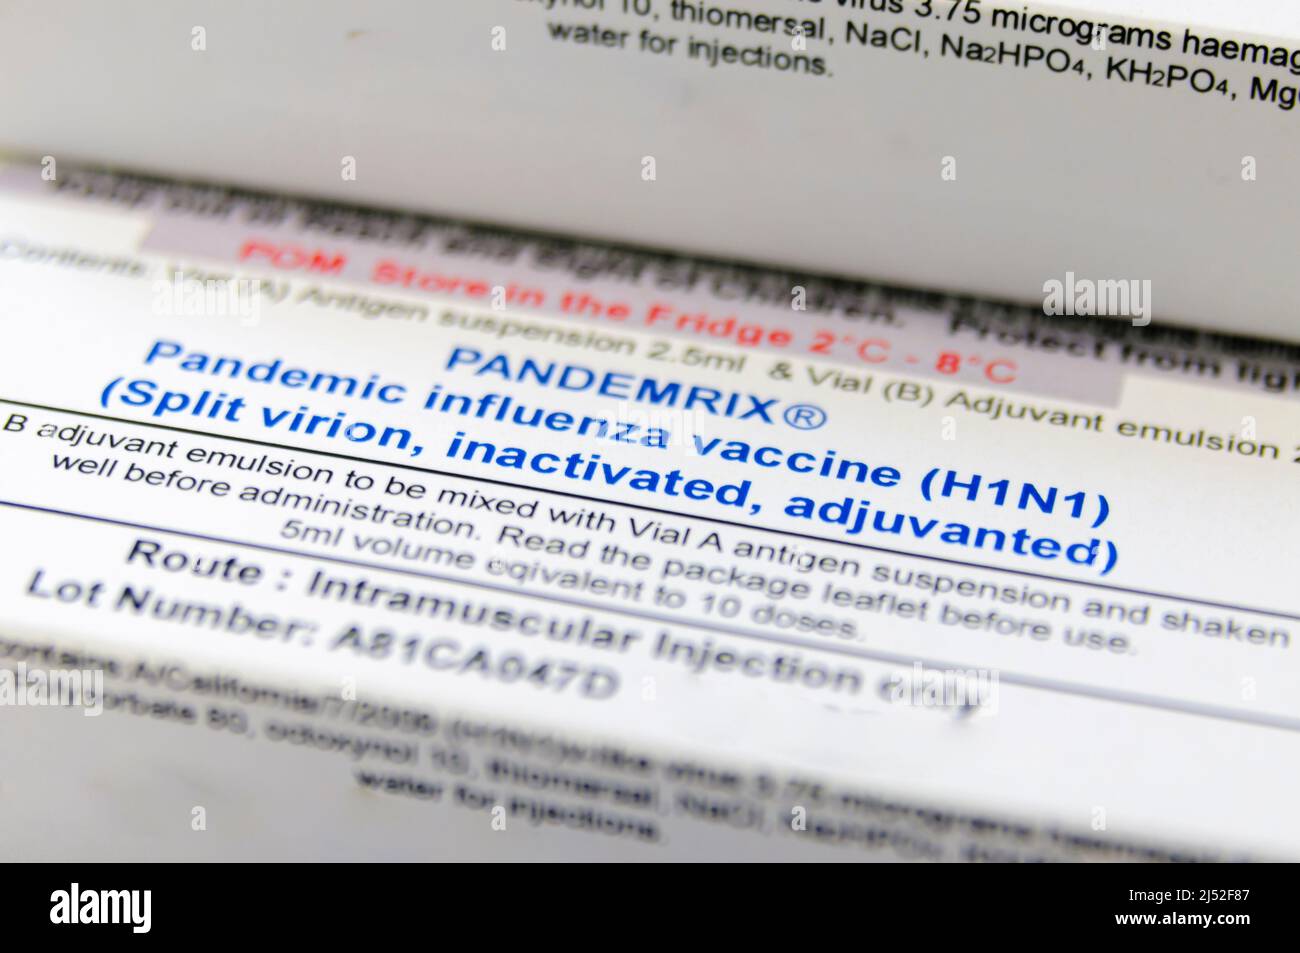 Boxes of Pandemrix, influenza vaccine for H1N1 (Swine Flu) Stock Photo